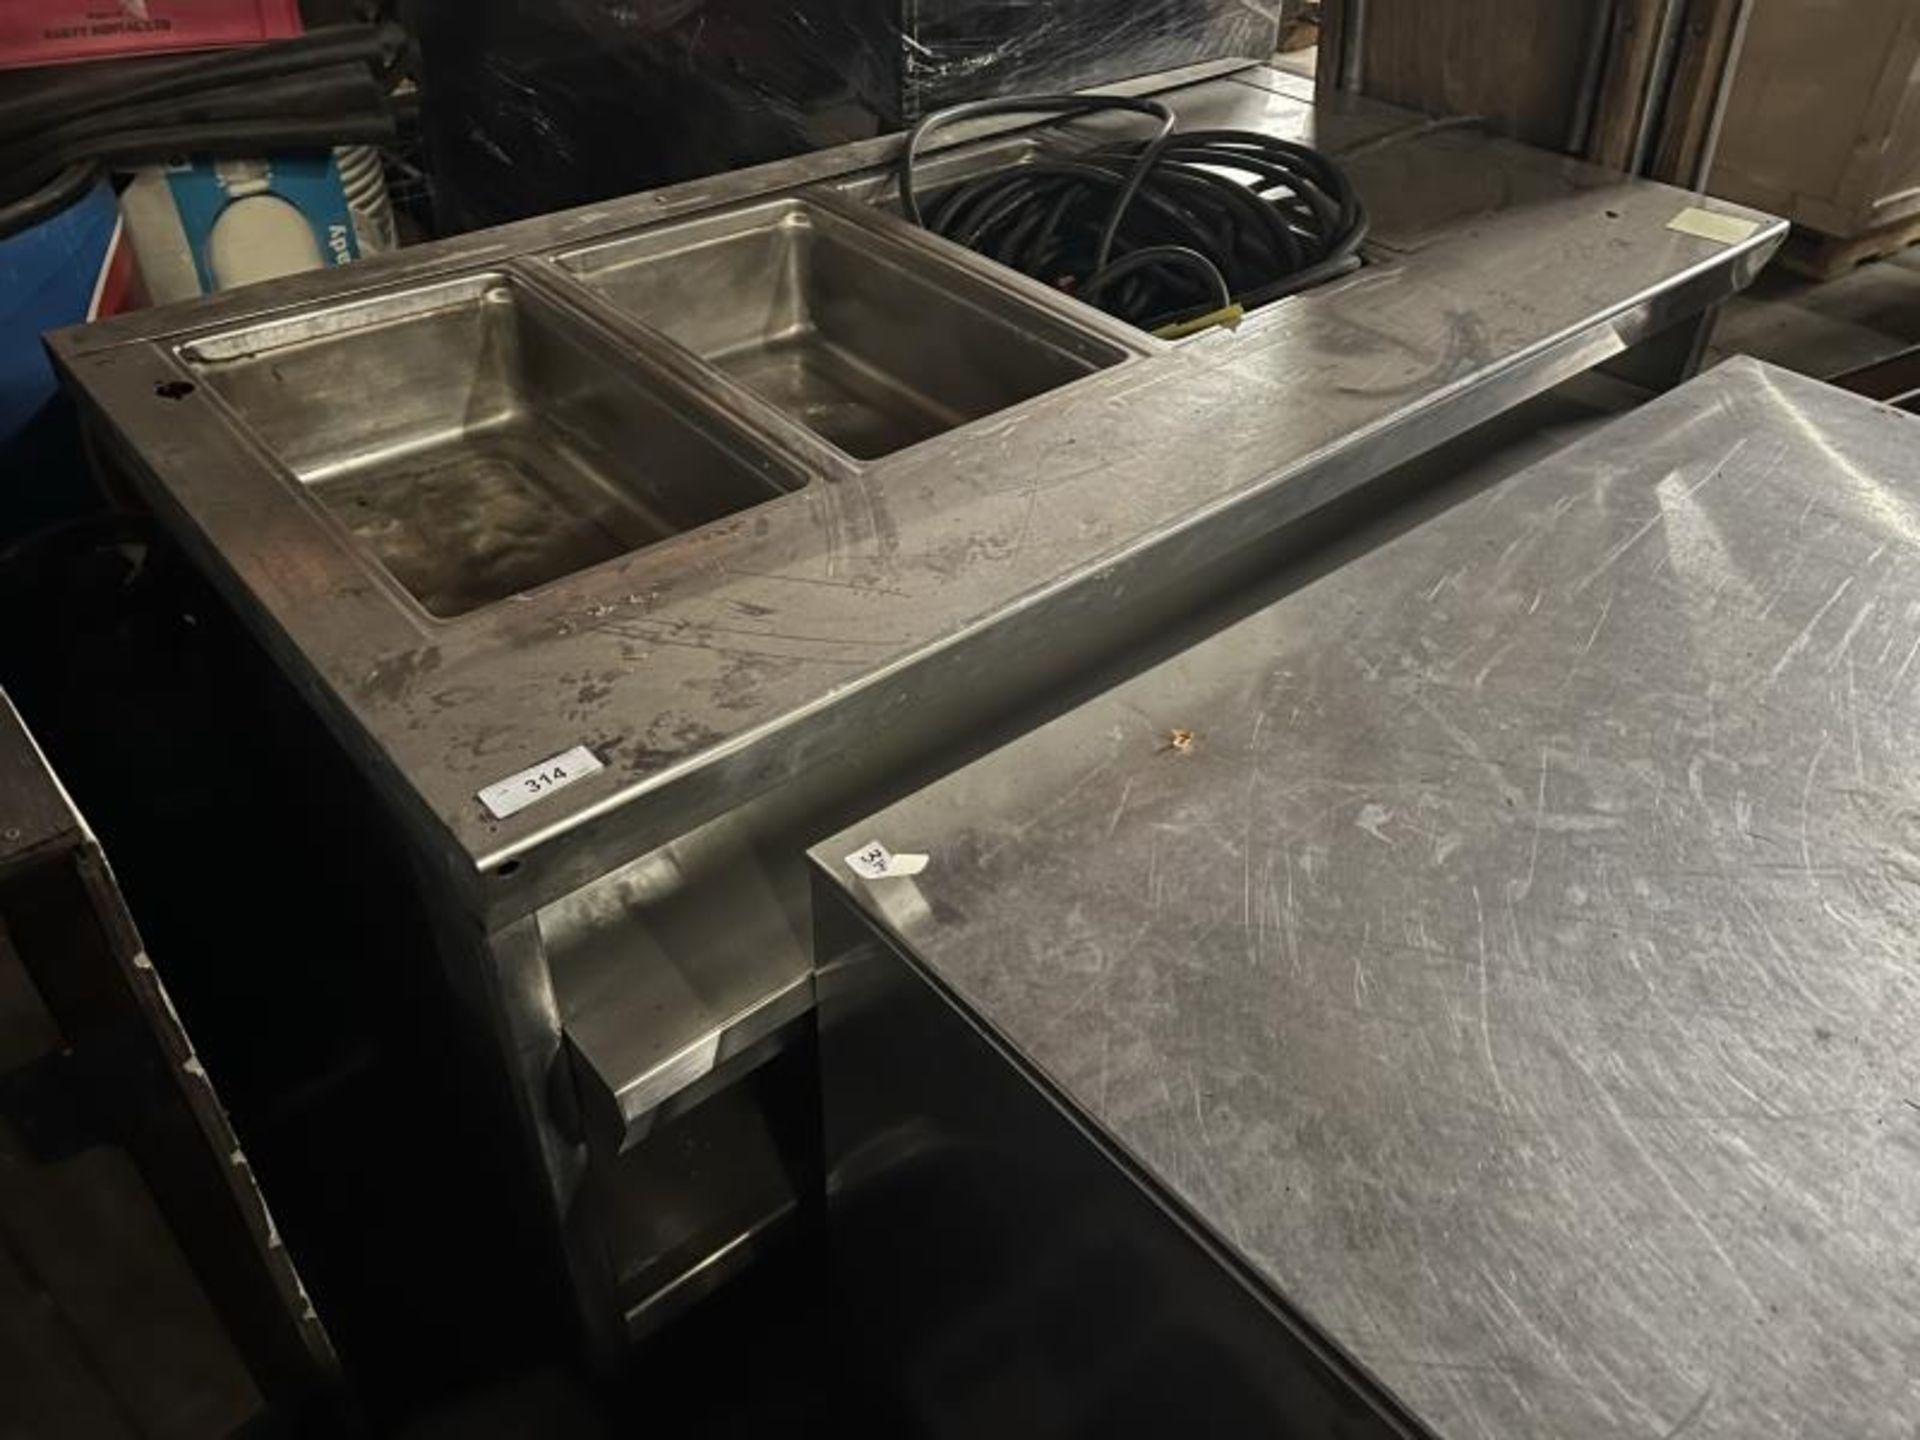 Lot of Pizza Oven, 3-Bay Steam Table, 2-Door Under Counter Refrigerator, Condition Unknown,